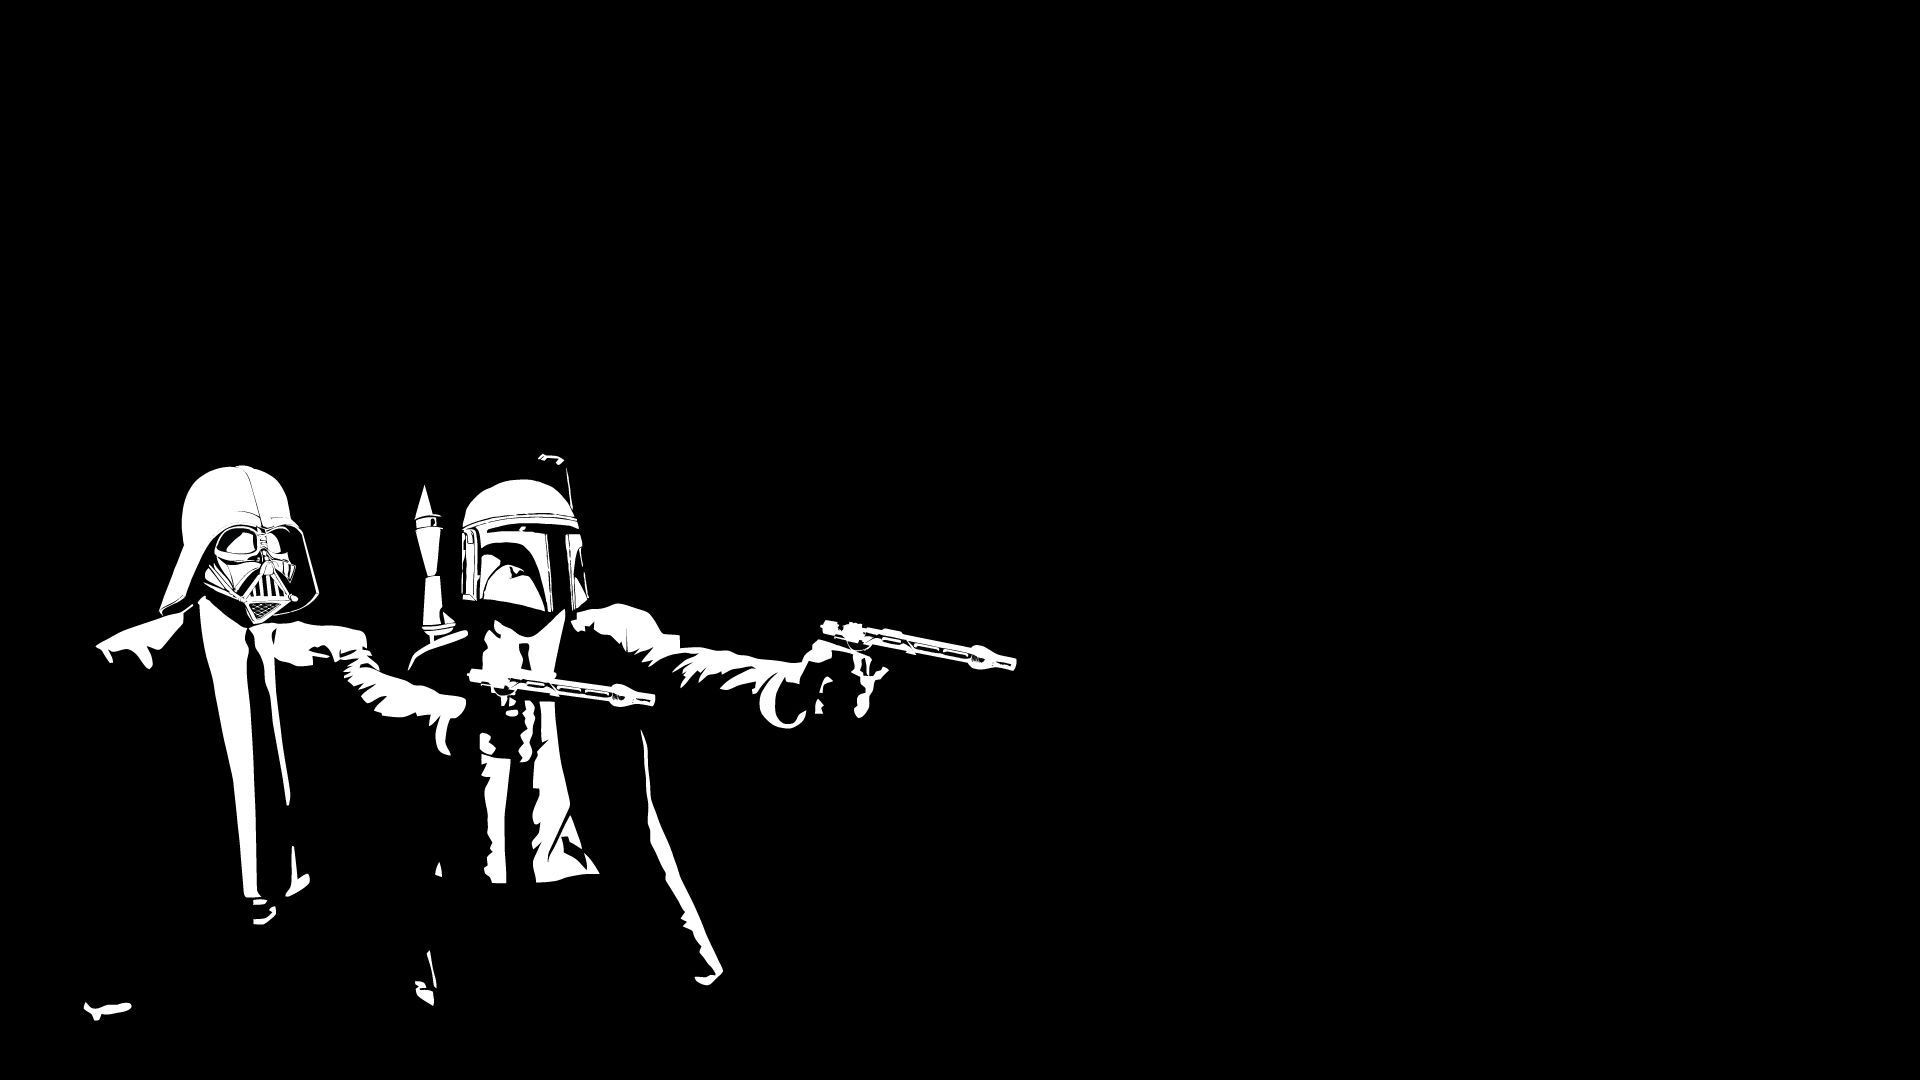 You can view, download and comment on Star Wars Pulp Fiction Crossover free hd wallpapers